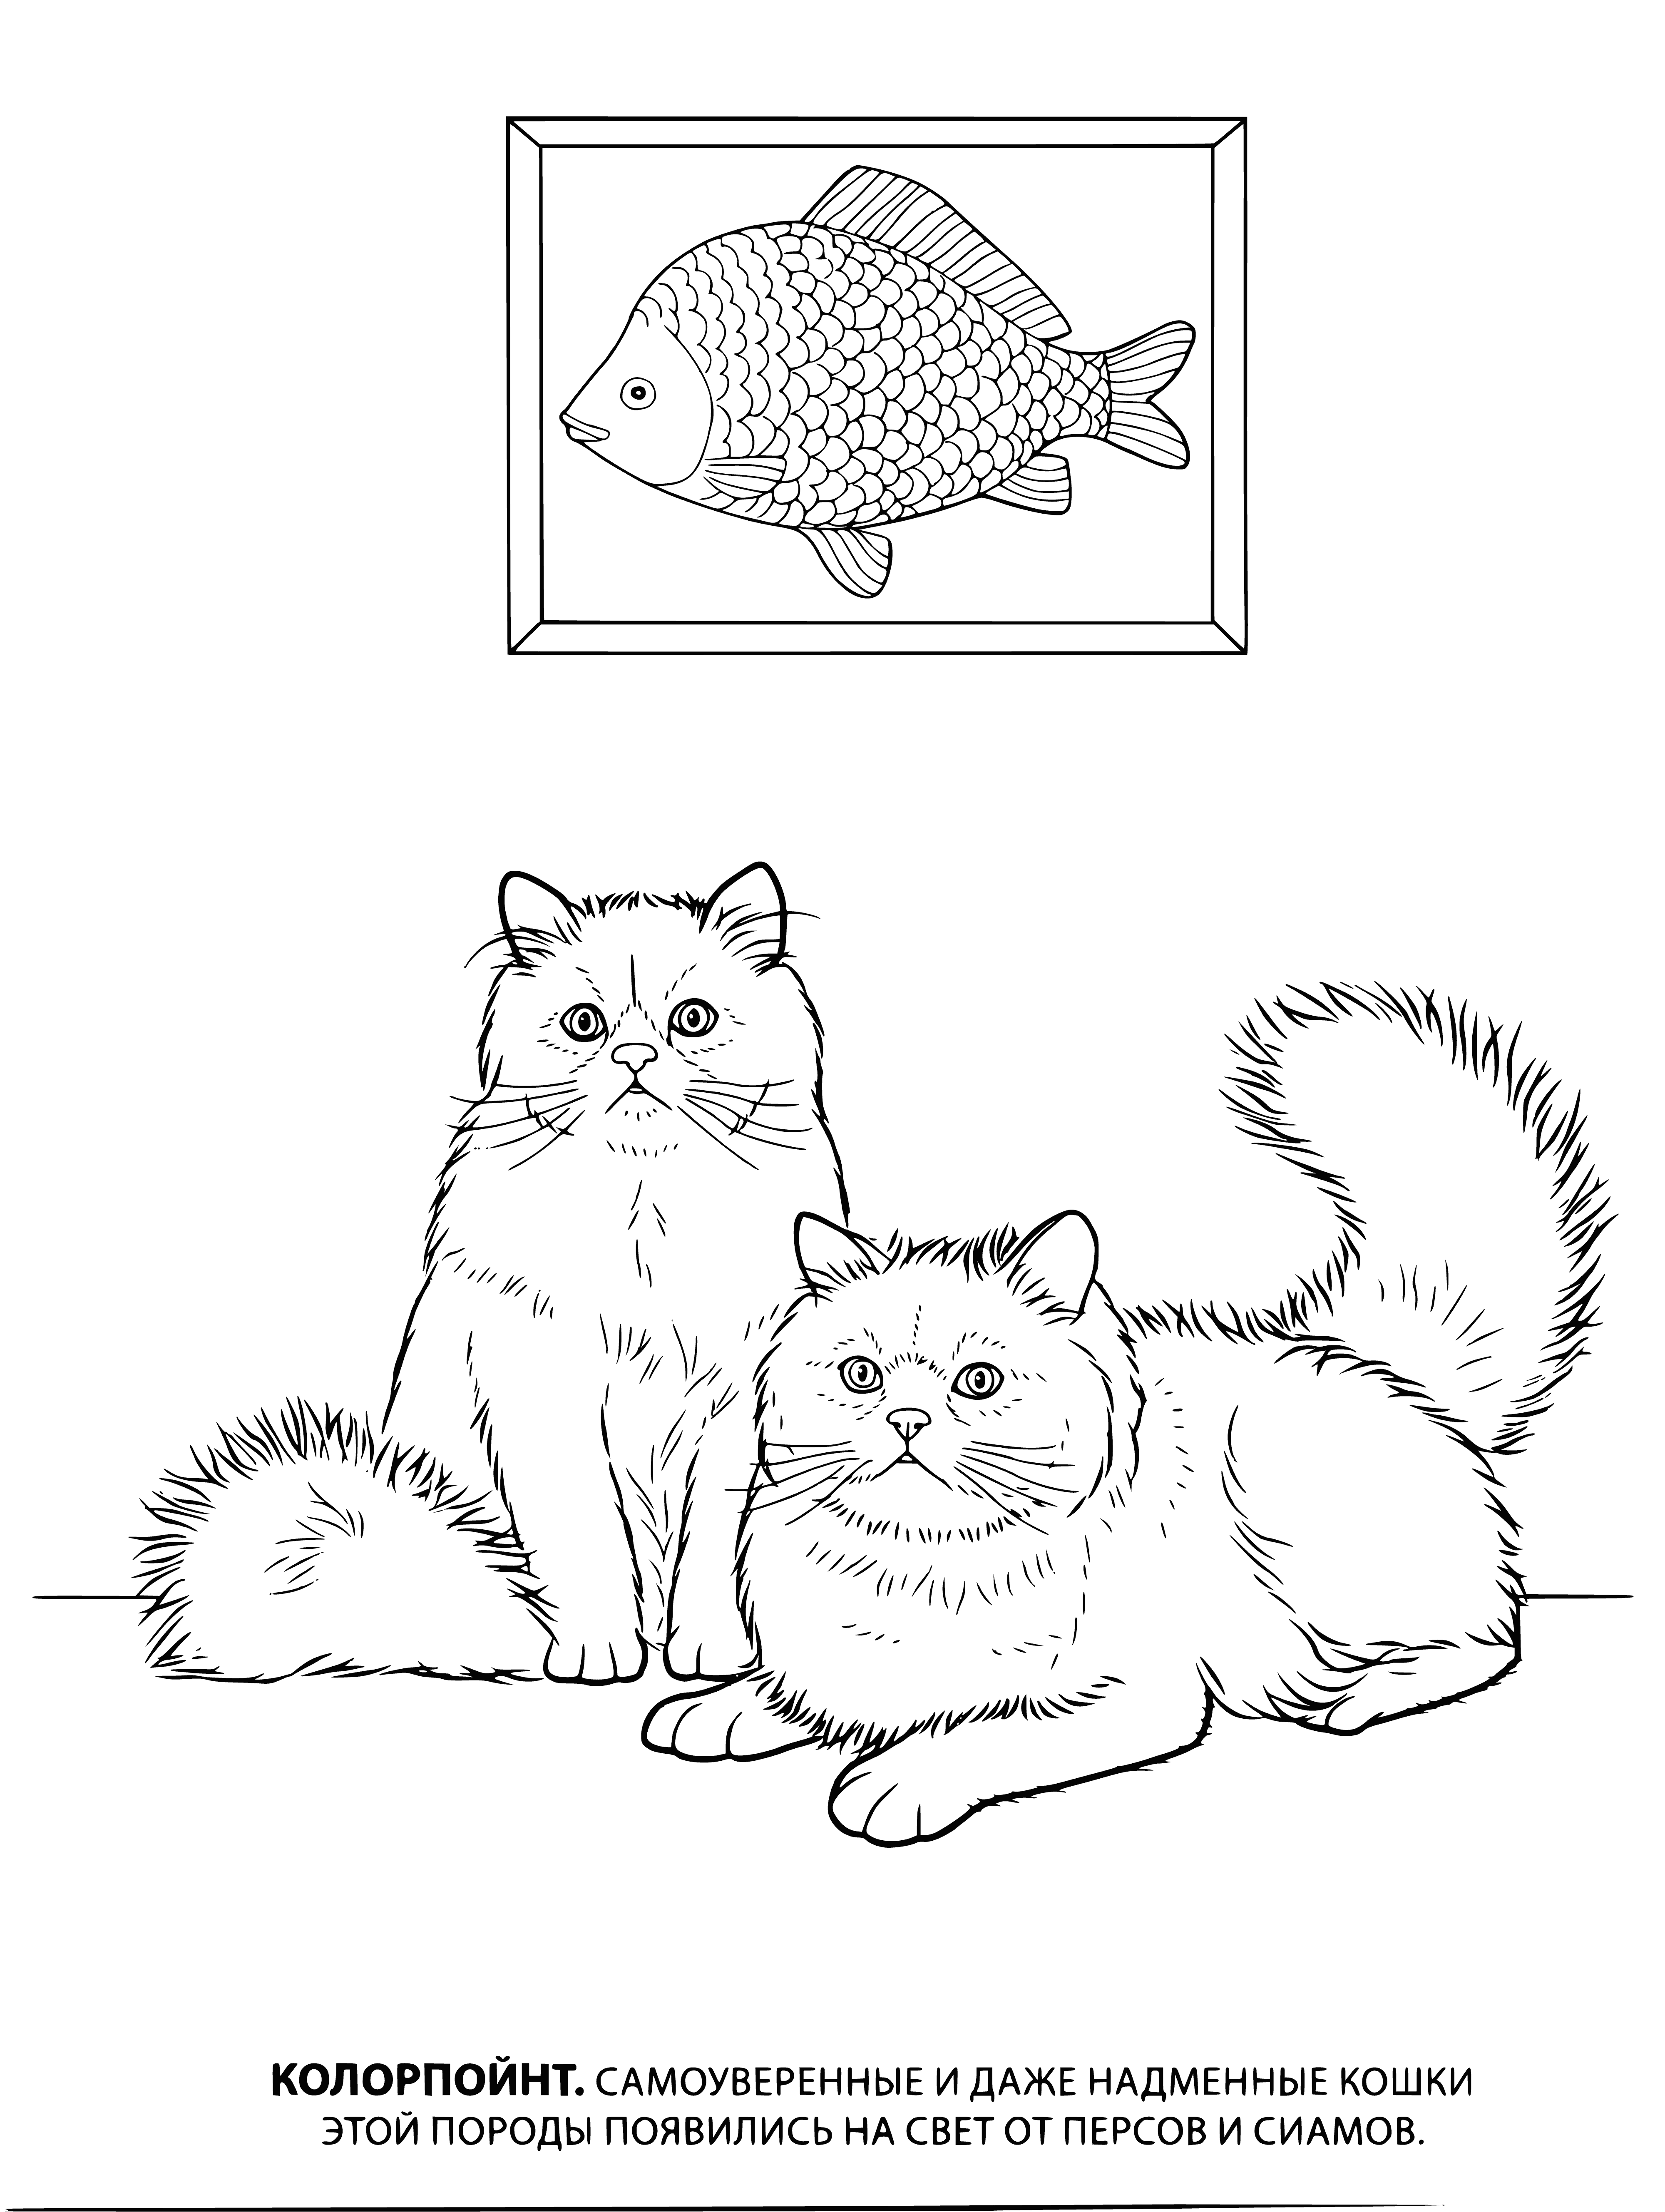 Colorpoint coloring page